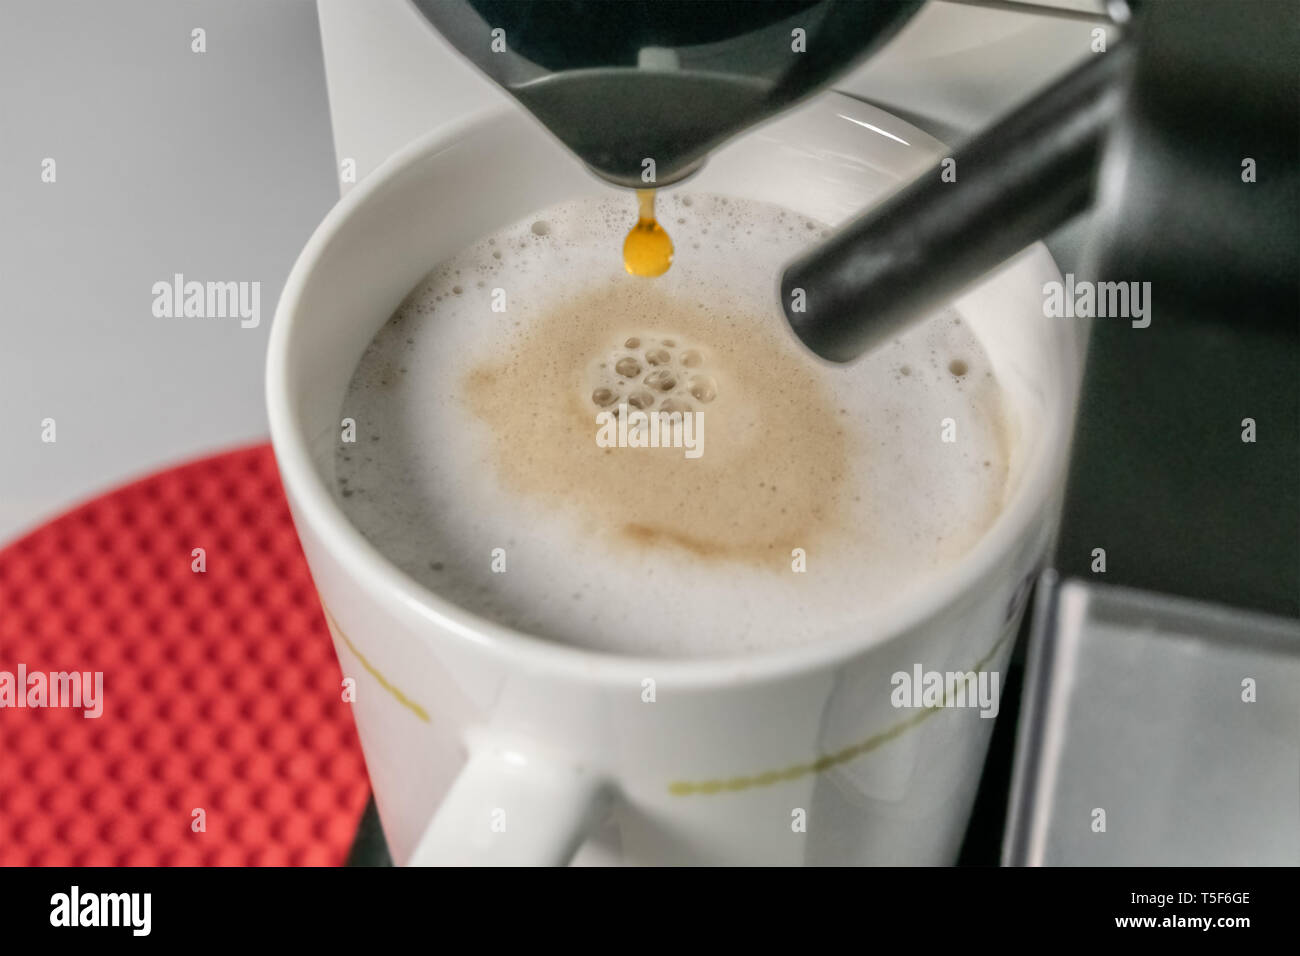 Making cappuccino - close up view of espresso pouring from coffee machine. Cappuccino has the main ingredients are Espresso, milk. Blurred background Stock Photo